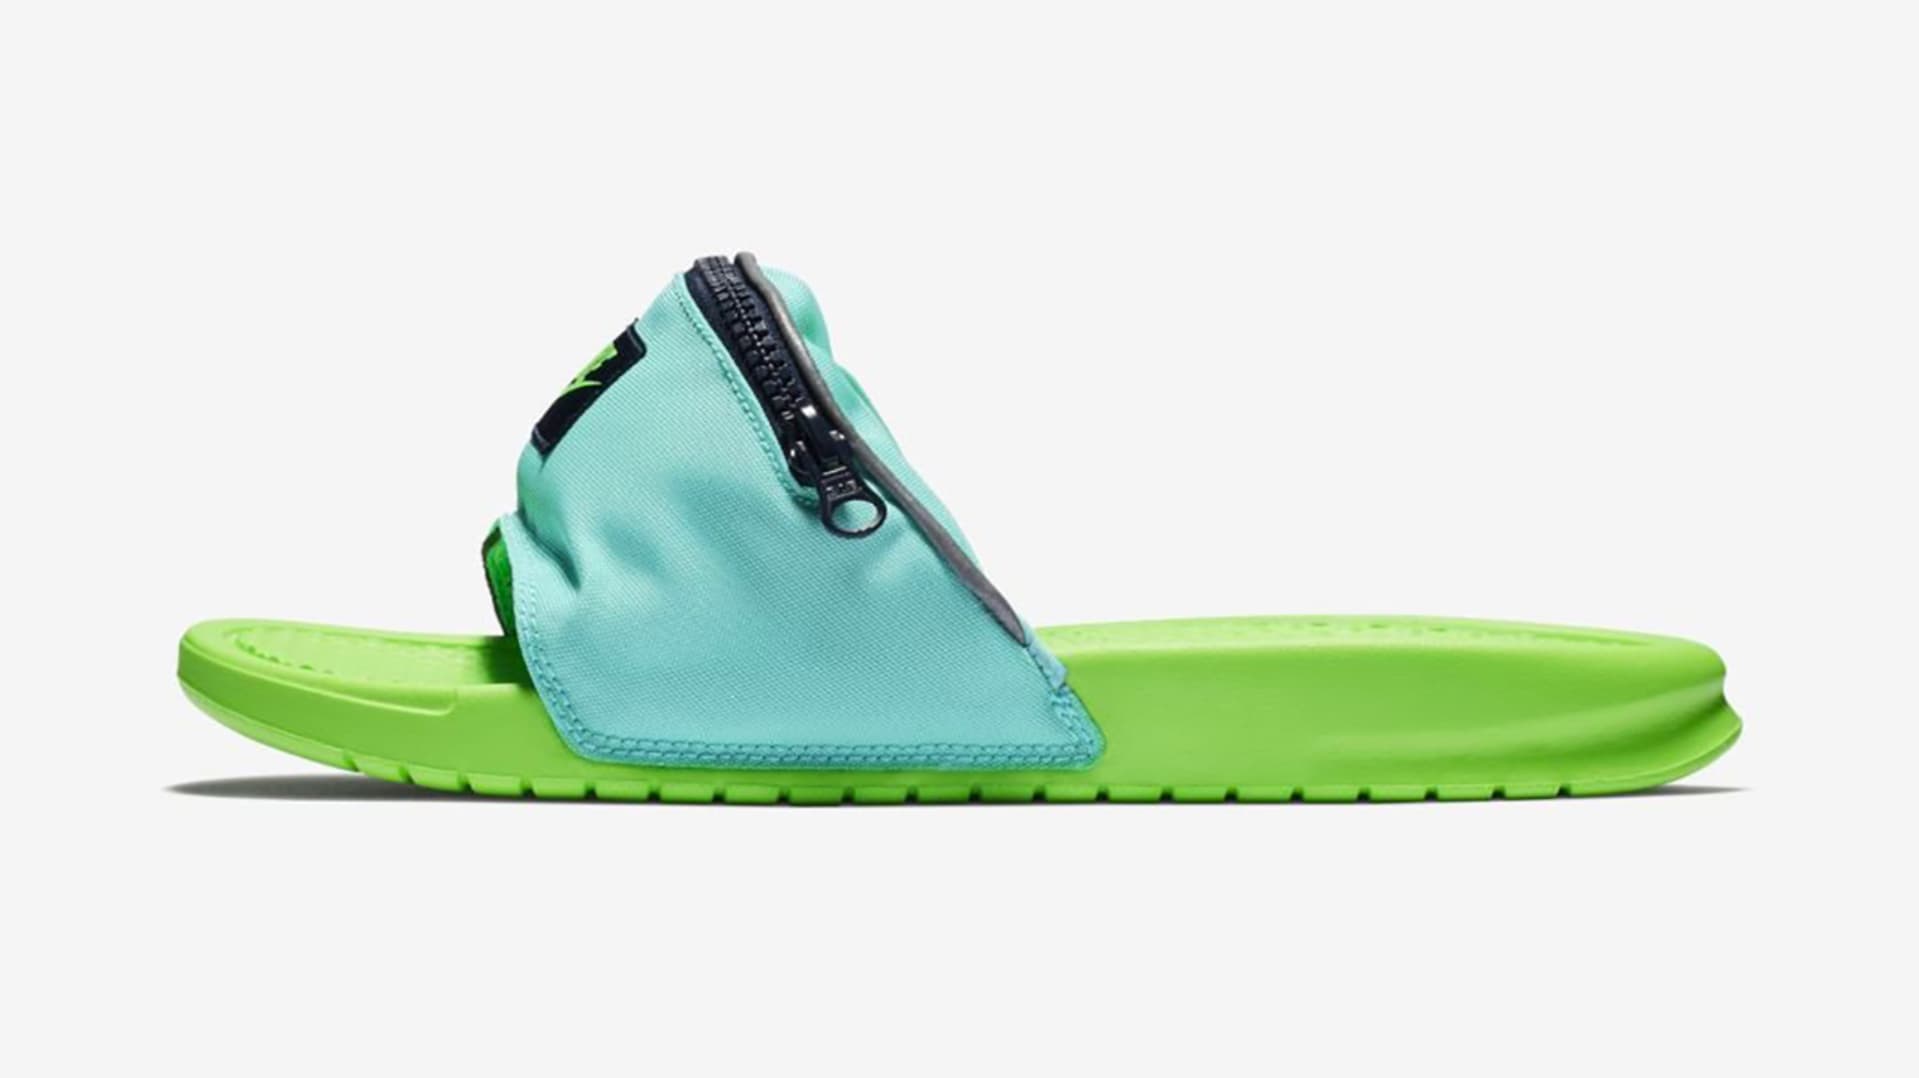 Think shoes can’t get uglier? Check out these fanny pack slides